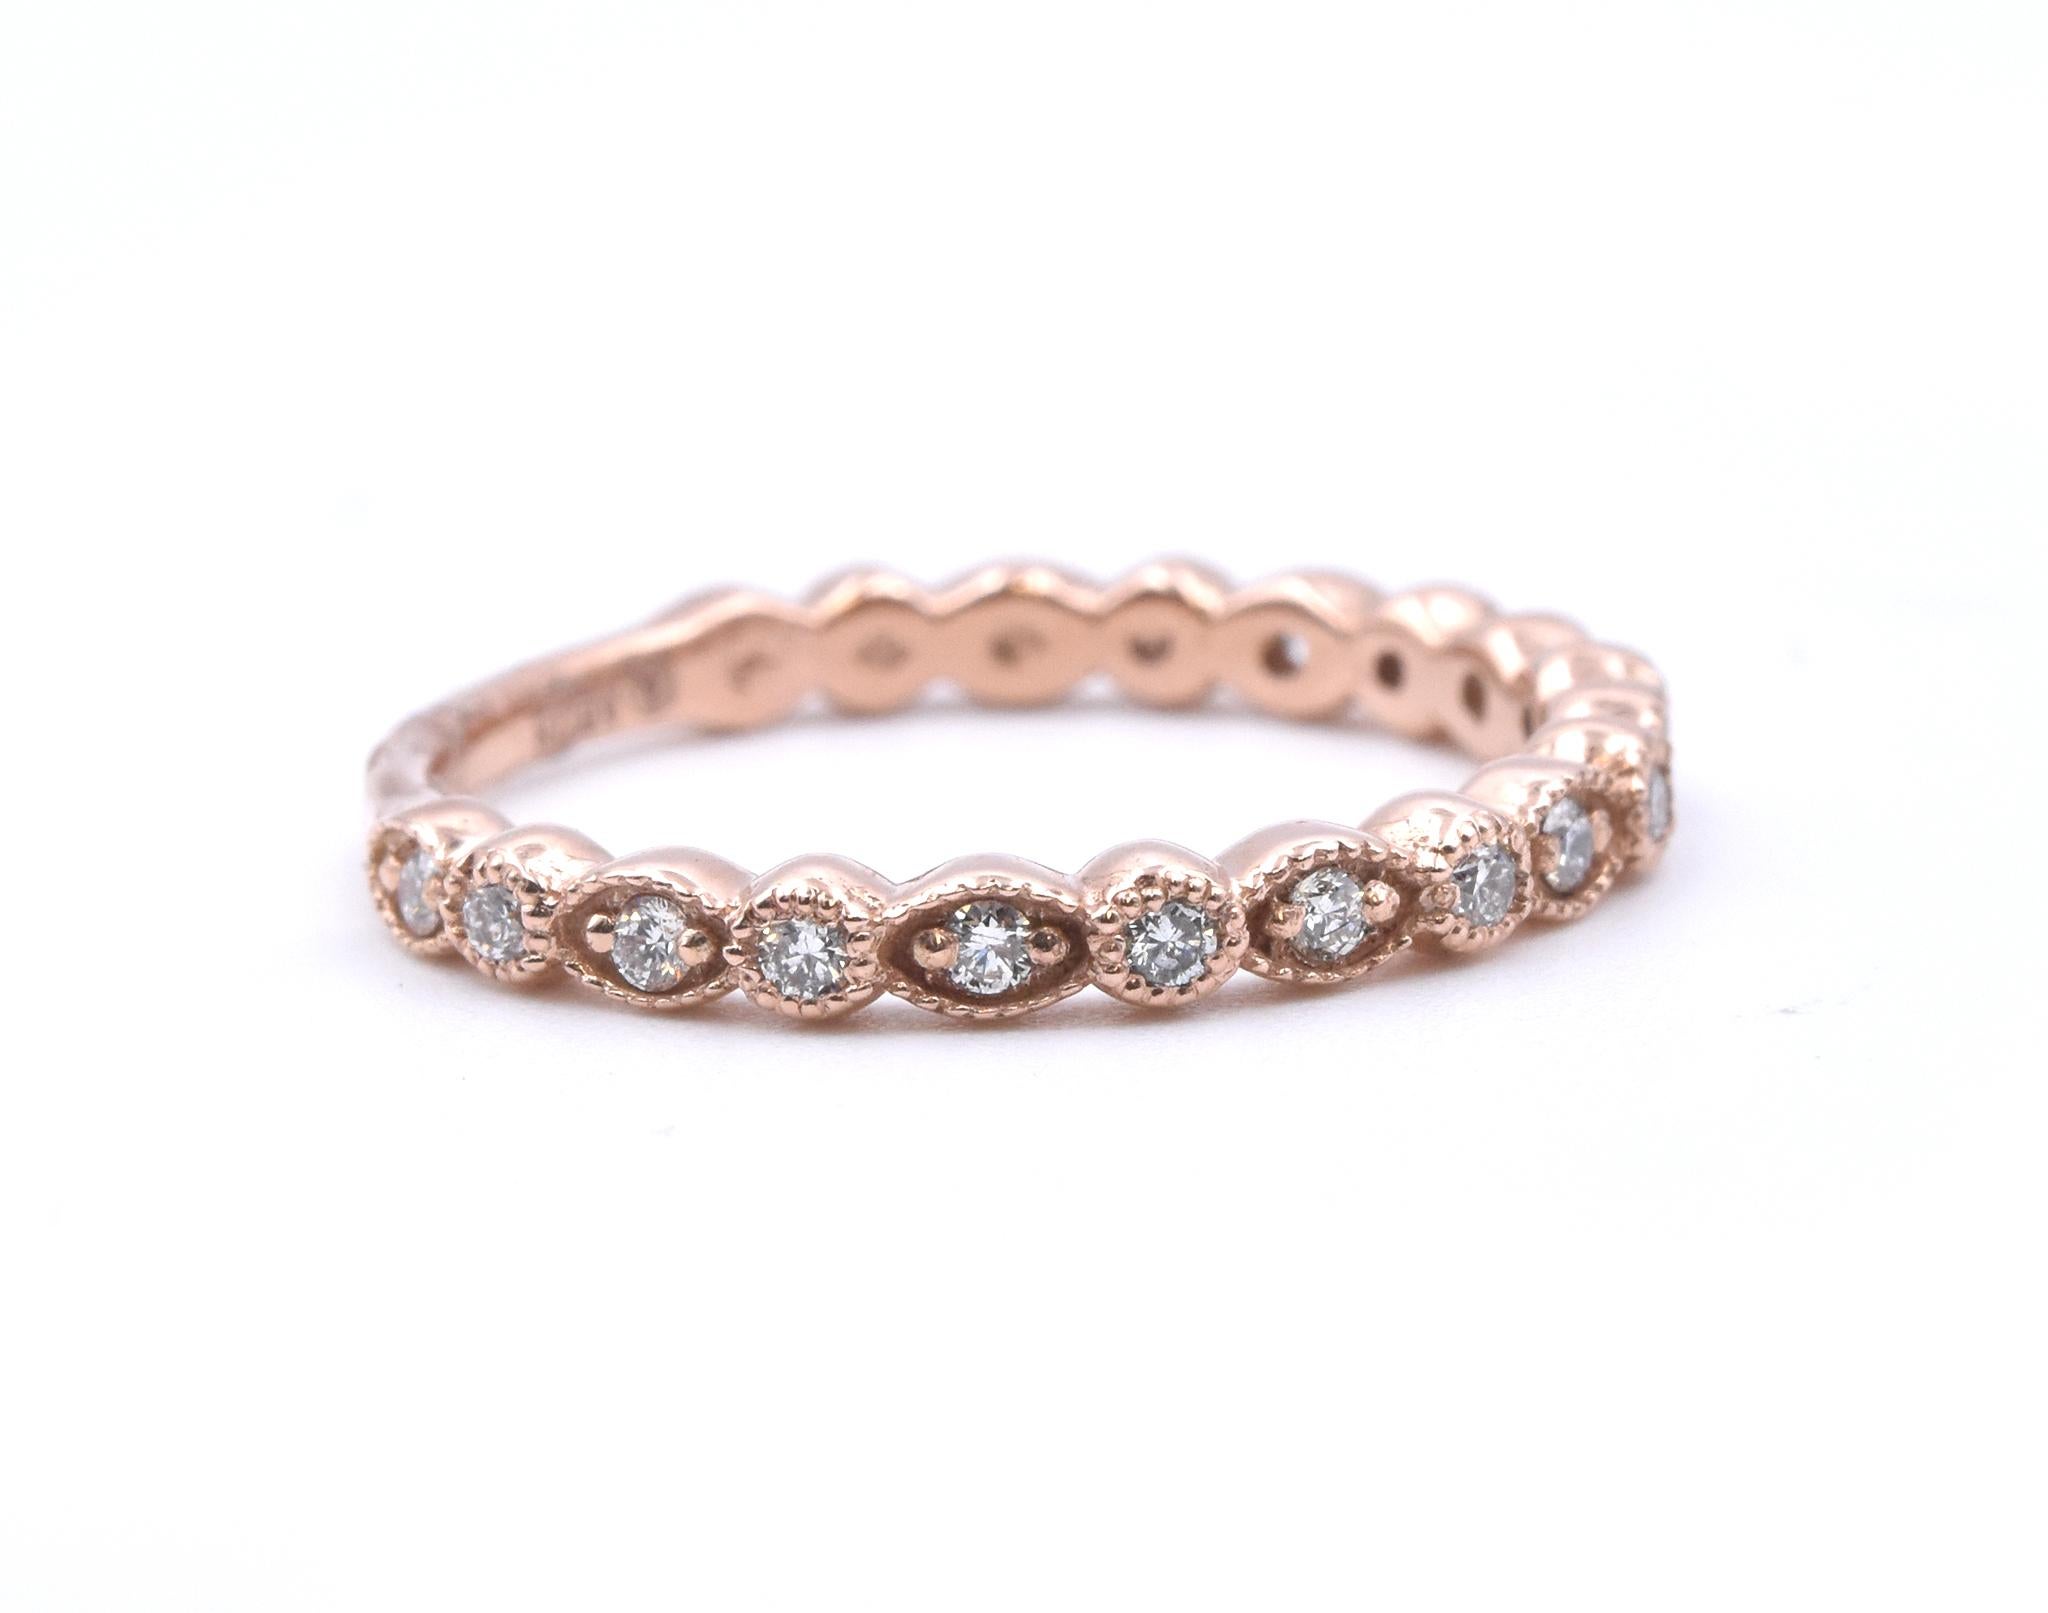 Designer: custom
Material: 14k rose gold
Diamonds: 19 round cut = .23cttw
Color: G
Clarity: VS
Size: 6.75 (please allow two additional shipping days for sizing requests)  
Dimensions: ring measures 2.5mm in width
Weight: 2.11 grams